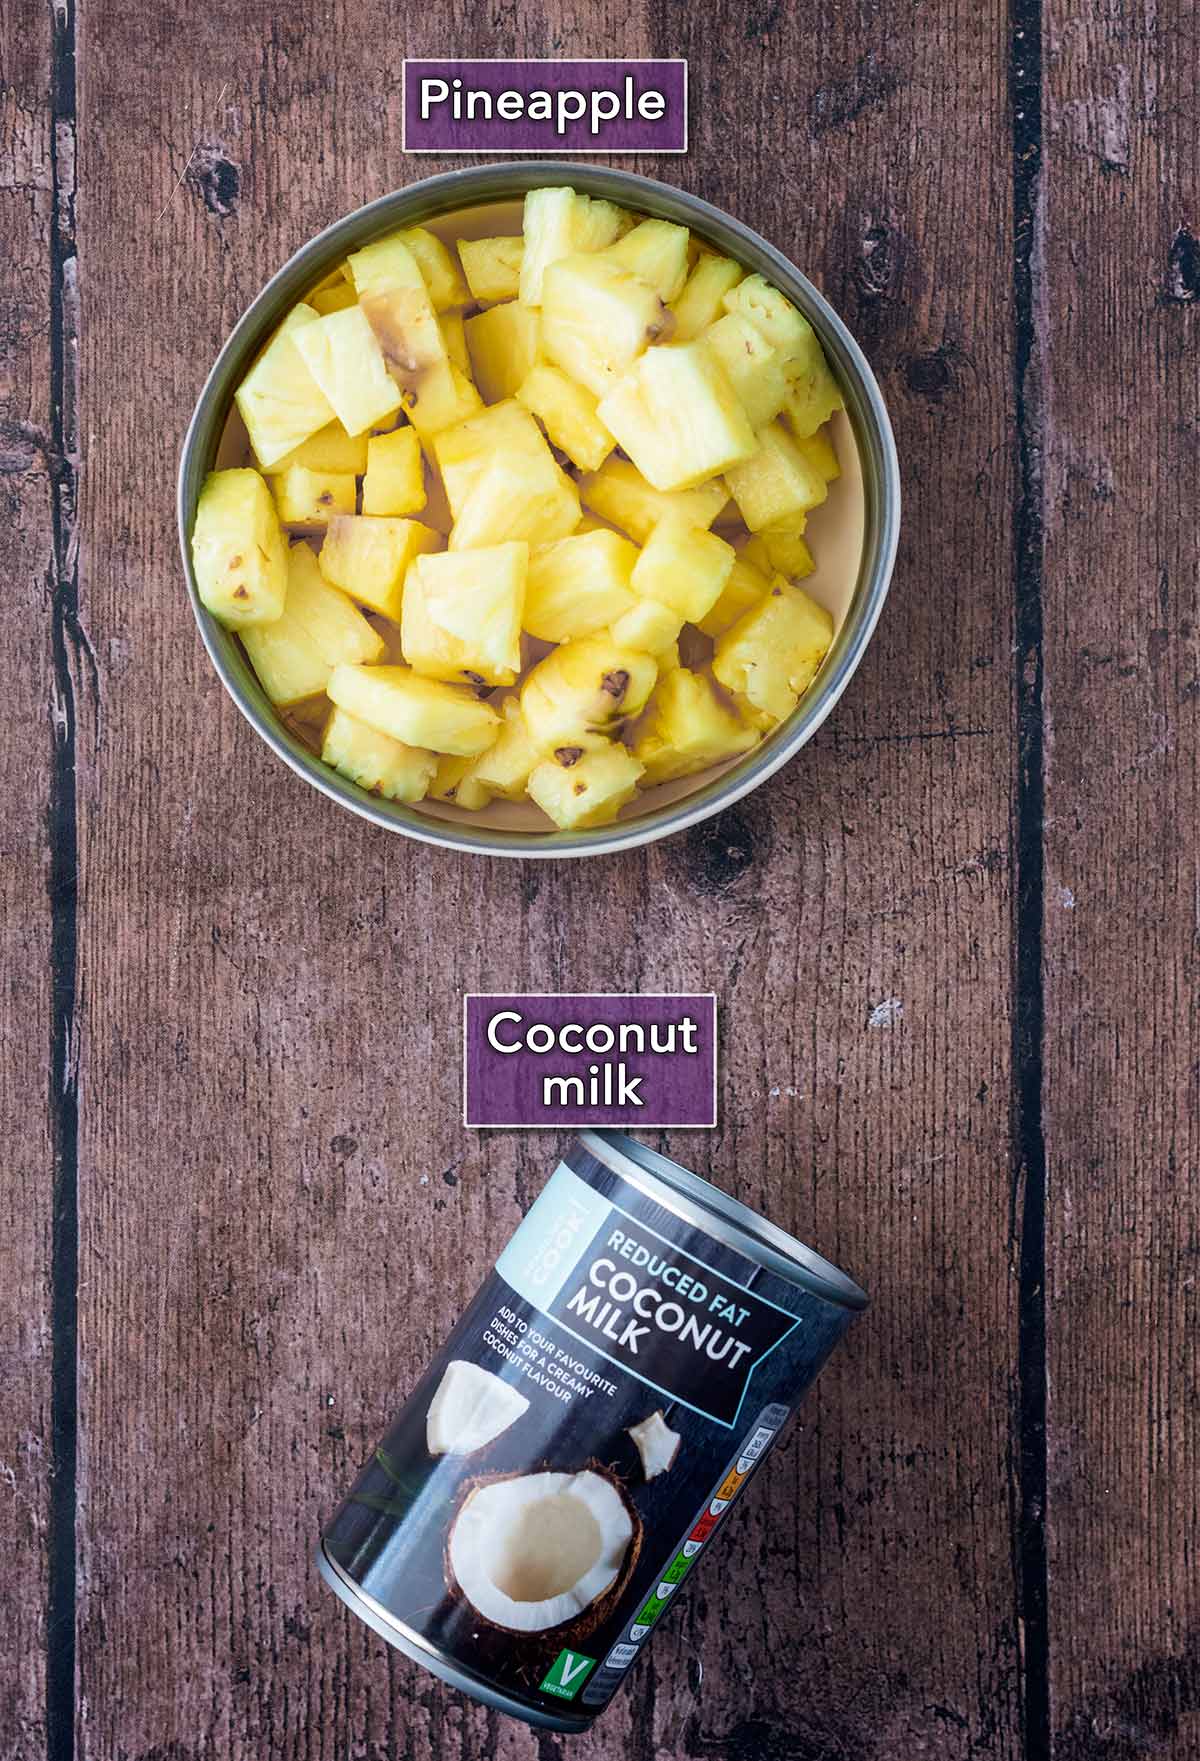 Pineapple chunks in a bowl and a can of coconut milk, both with labels.